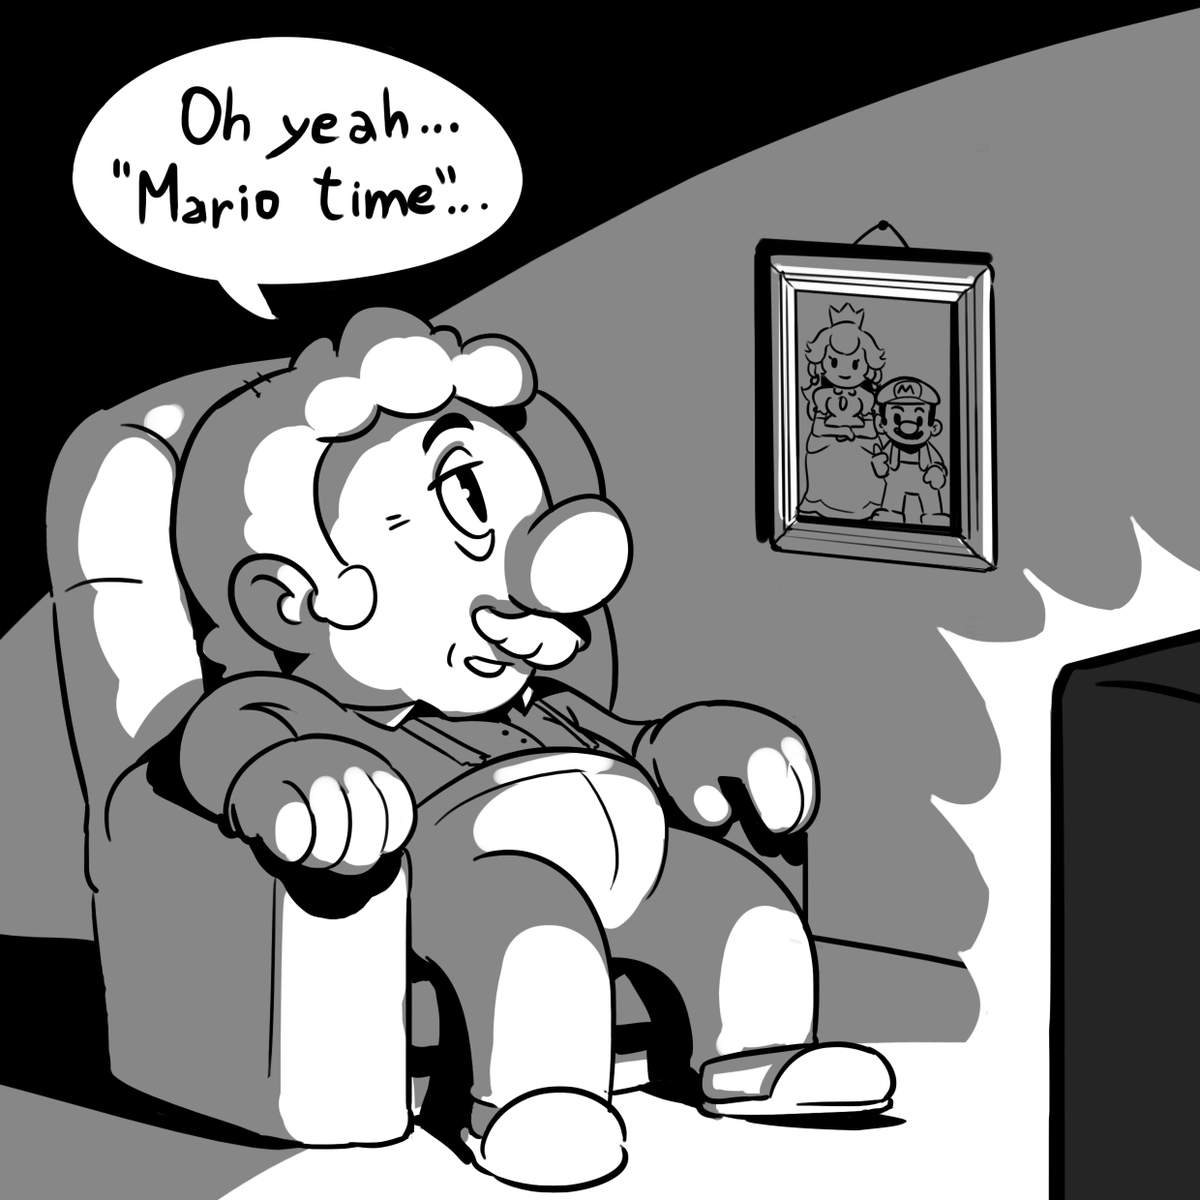 I've been watching New Super Mario Bros U speedruns before going to sleep and the phrase "Oh yeah, Mario time"  has been stuck in my brain 